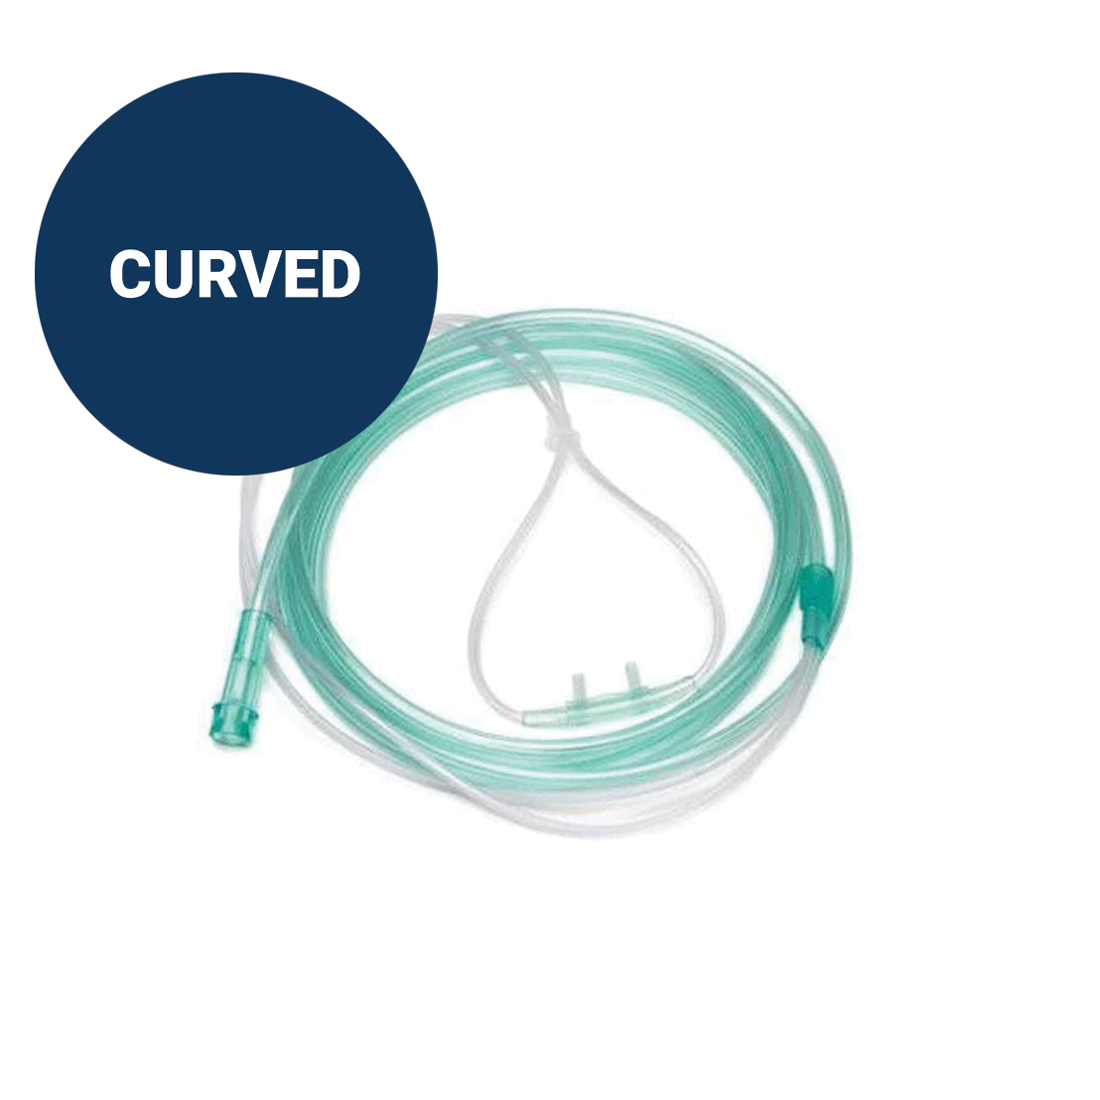 First Breath® Nasal Cannula, with 7' Tubing, Curved, Flared Tips, Over-the-Ear Style  - 50/Case